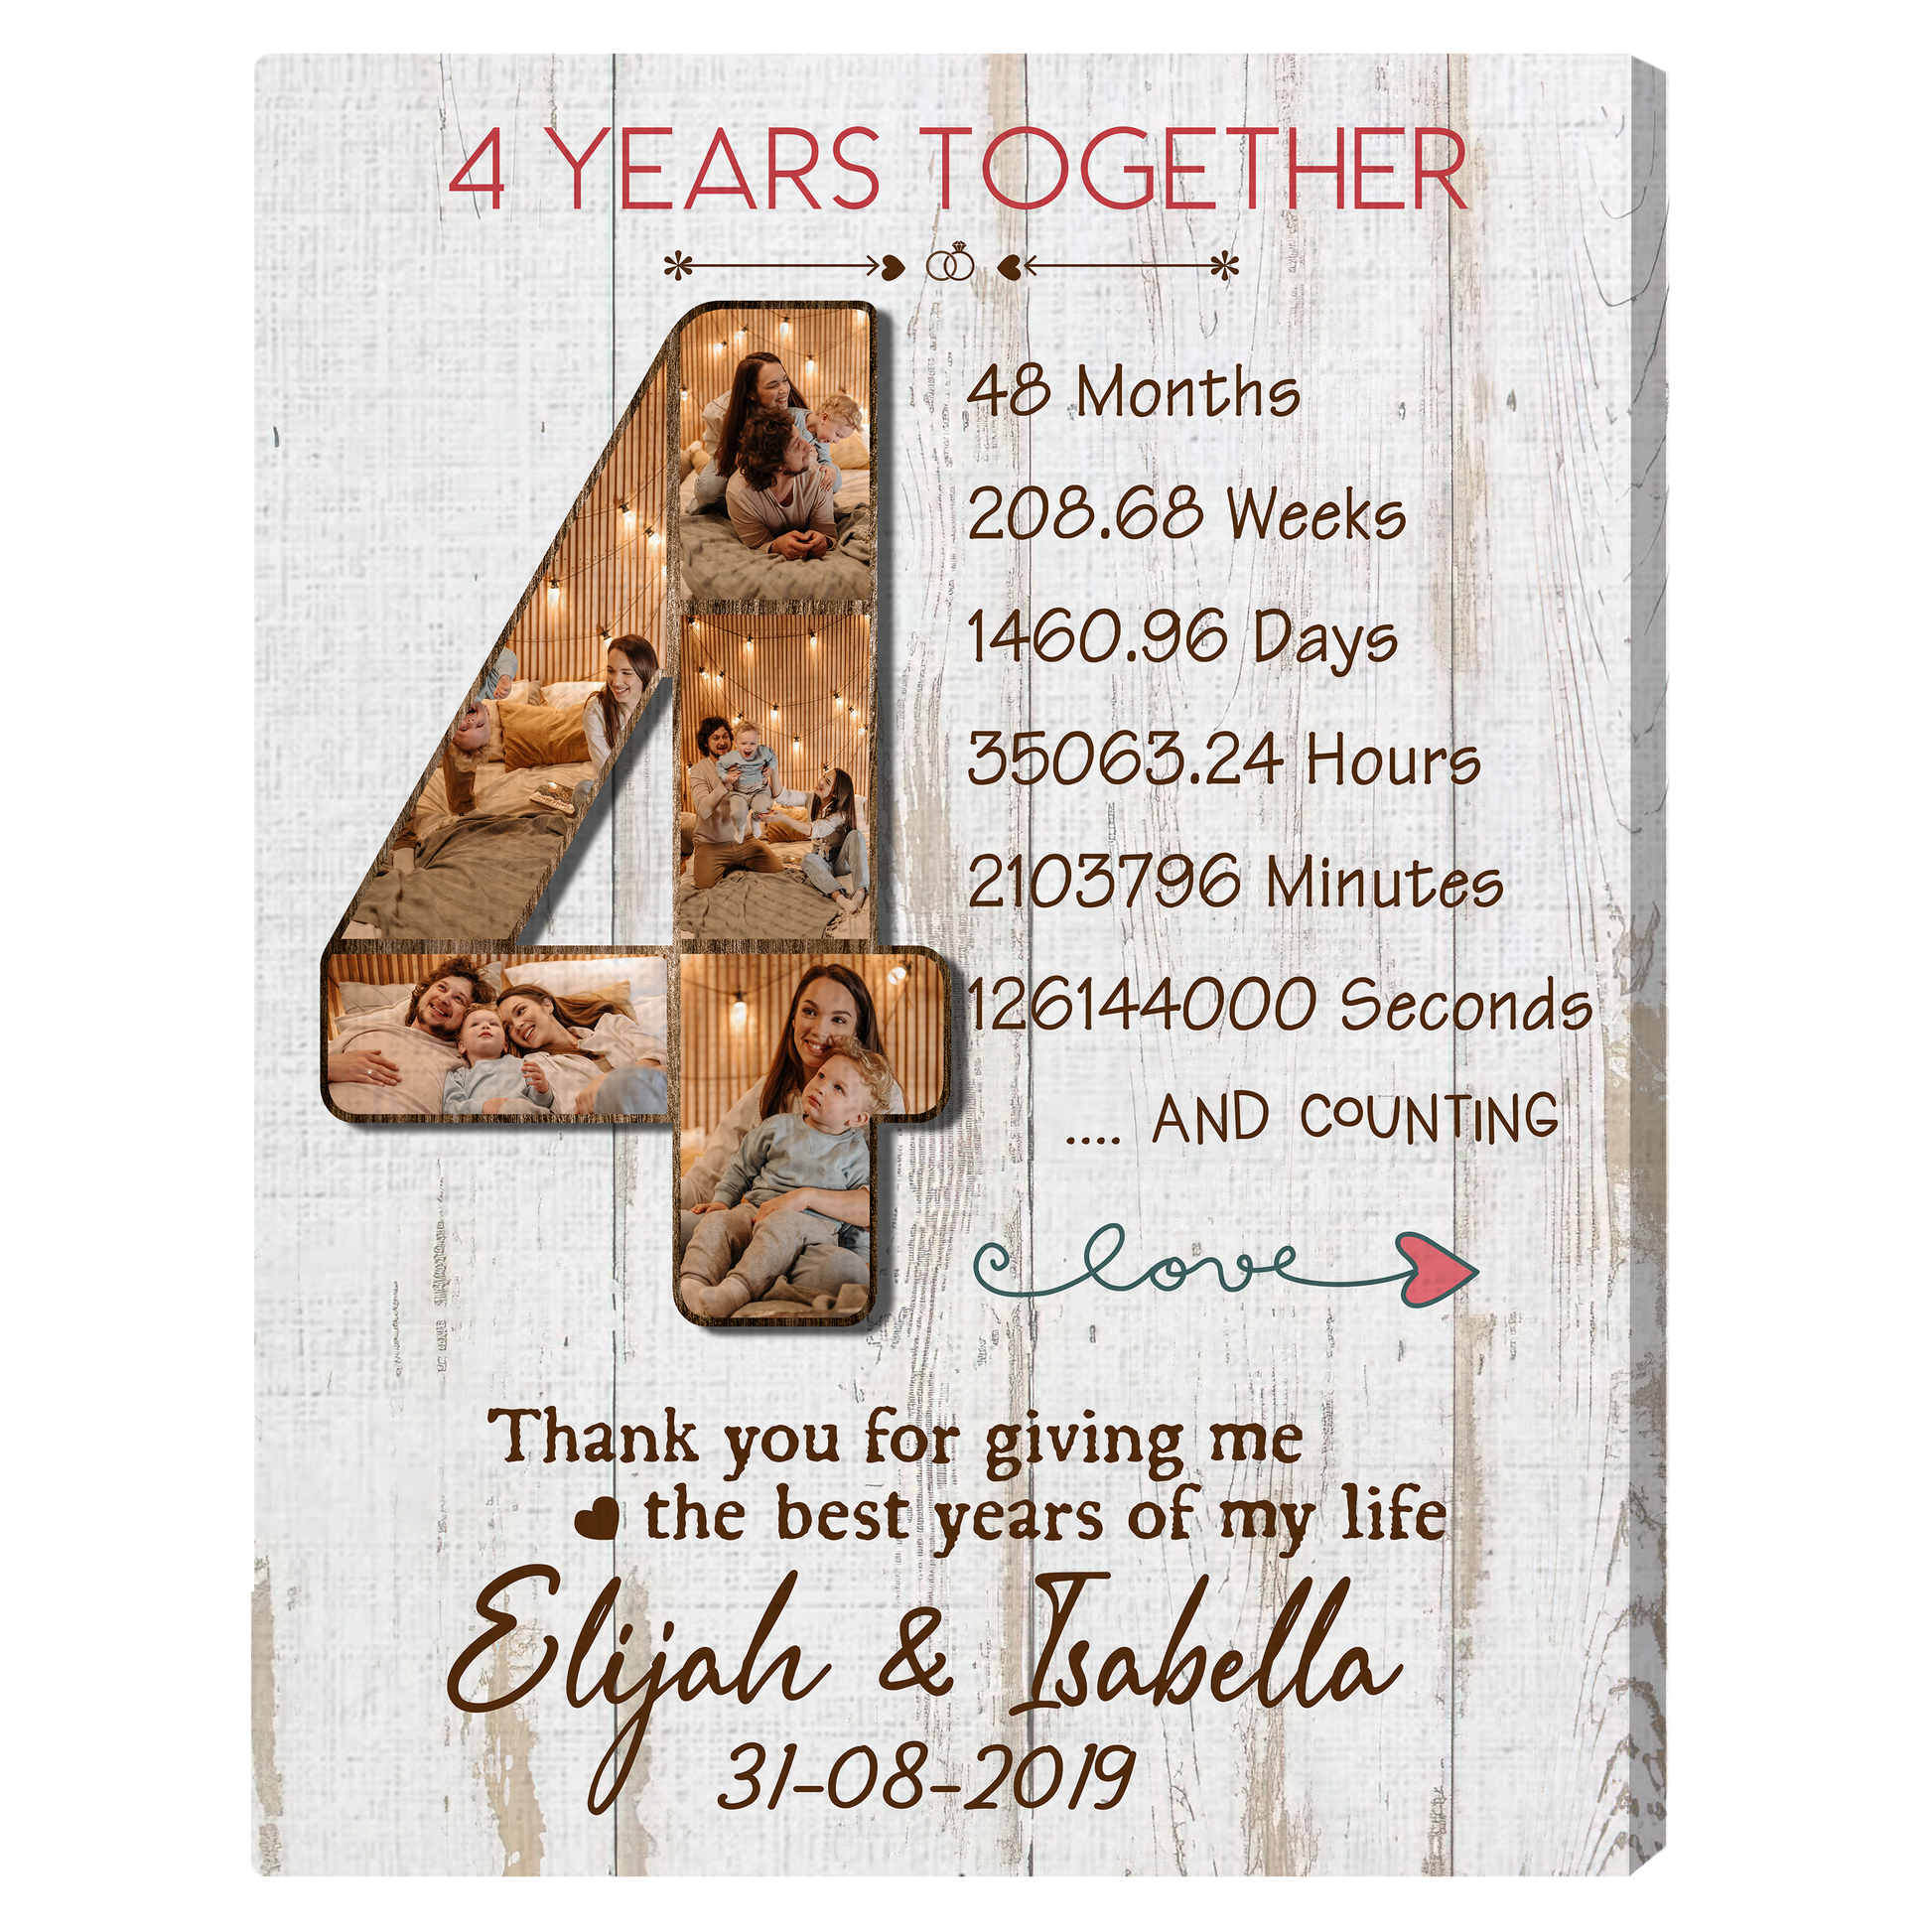 Personalized wedding anniversary gift for him for her - 4 years together - custom Couple photo canvas print - MyMindfulGifts